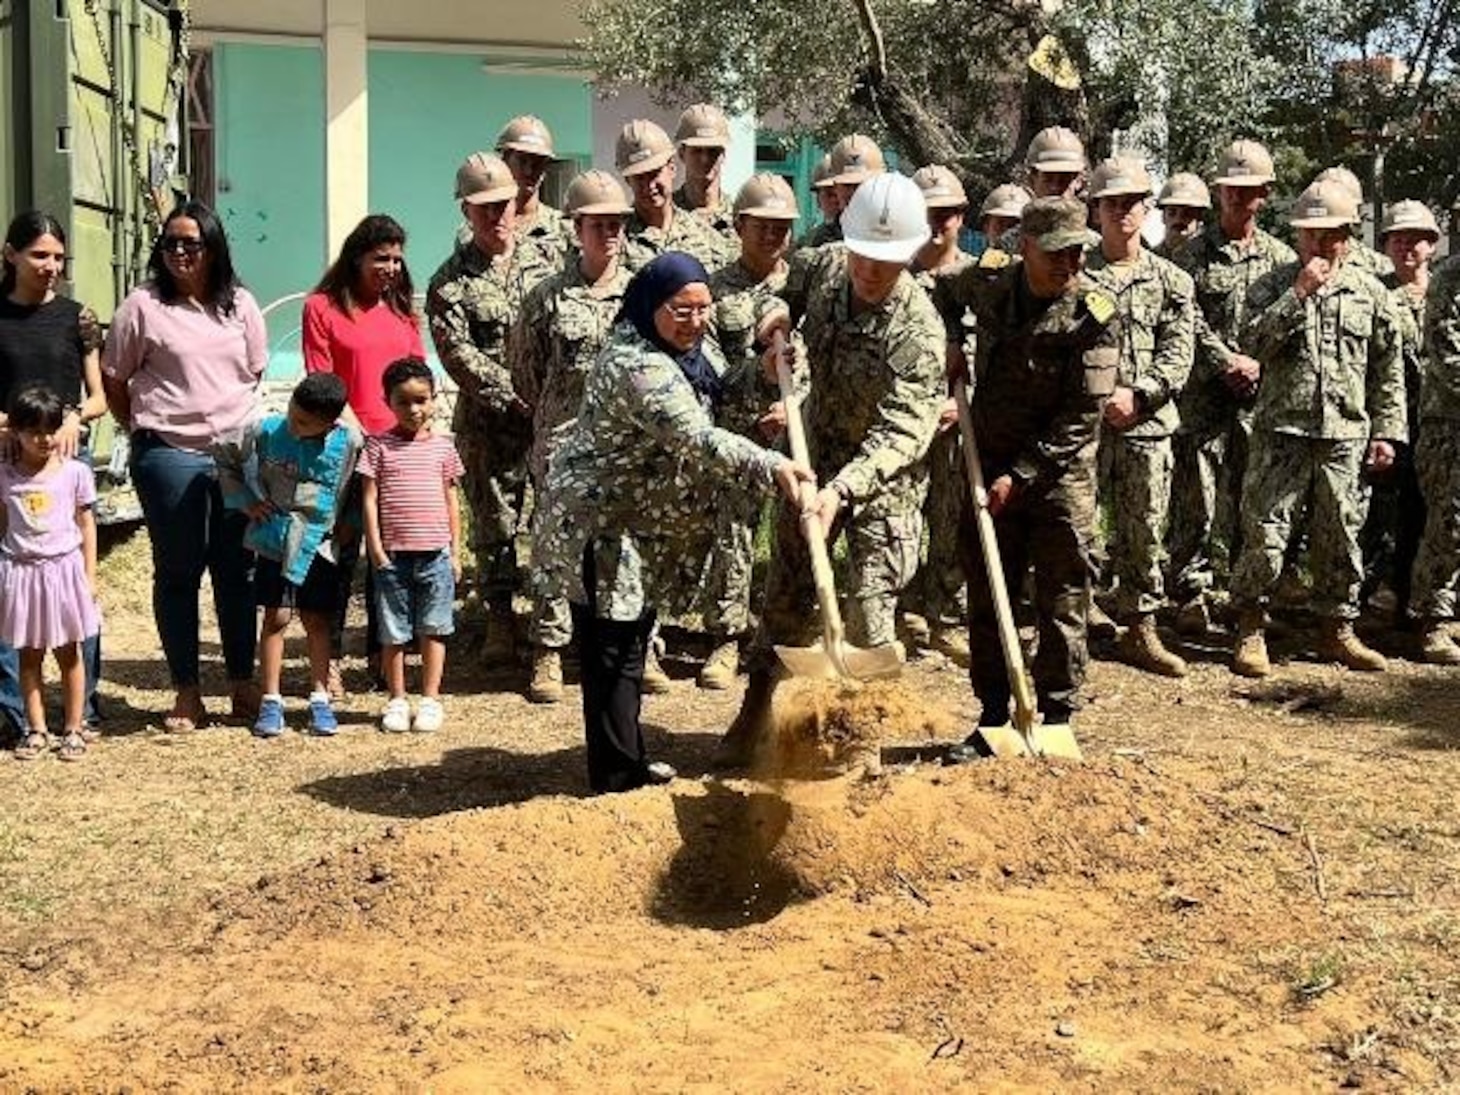 (June 7, 2022) Left to right, School Director Amel Glai, U.S. Navy Lt. j.g. Ramses Carranza, and Tunisian Navy CAPT Naimi Hassen, break ground during a ceremony to mark the start of the construction of a new 130 square meter, two-room kindergarten building with a bathroom at the local elementary school in Bizerte, Tunisia on June 7, 2022. Phoenix Express 22, conducted by U.S. Naval Forces Africa, is a maritime exercise designed to improve cooperation among participating nations in order to increase maritime safety and security in the Mediterranean.